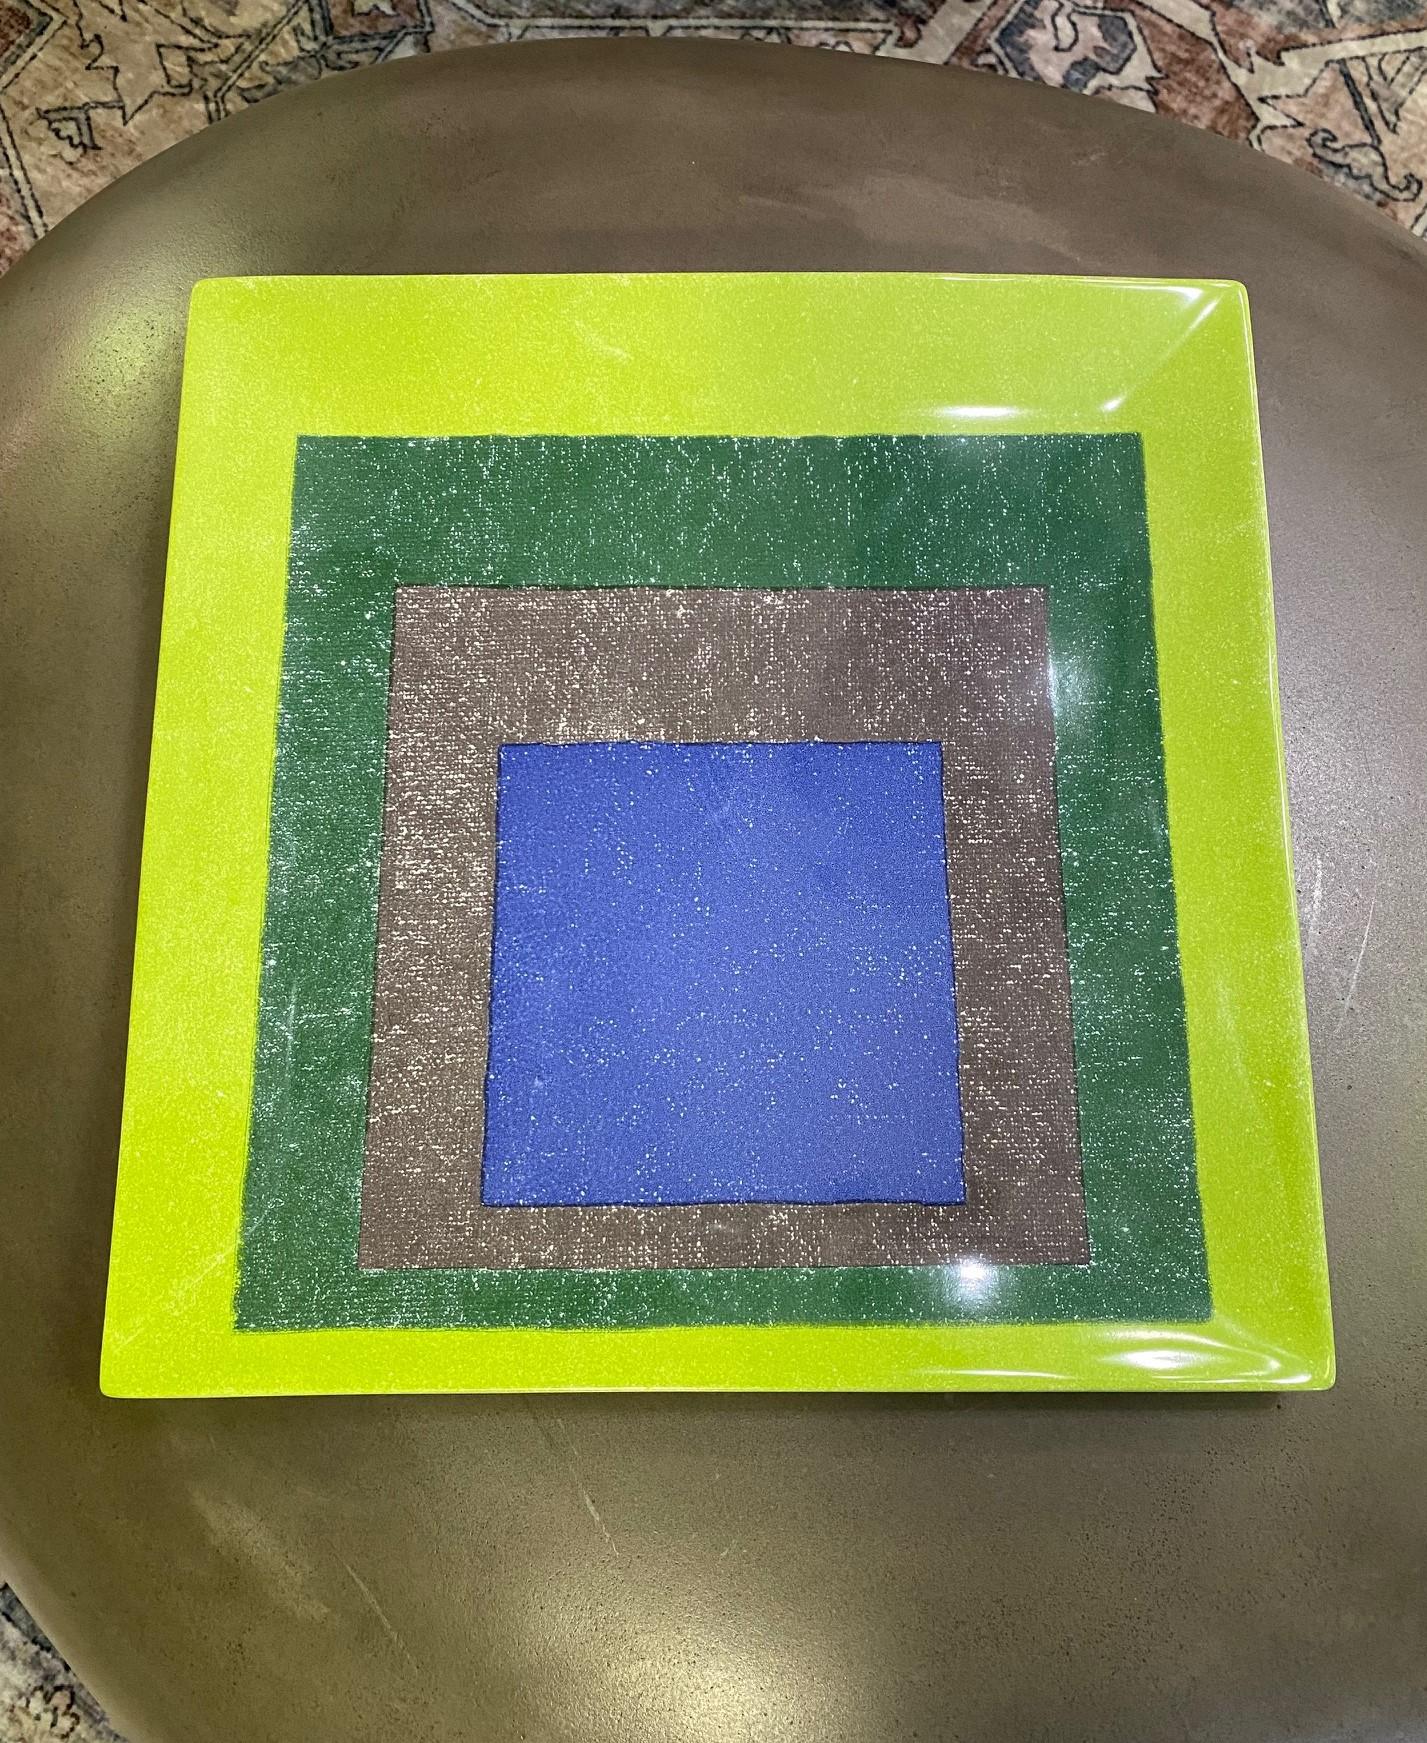 Italian Josef Albers Study for Homage to the Square Limited Edition Ceramic Platter 1999 For Sale